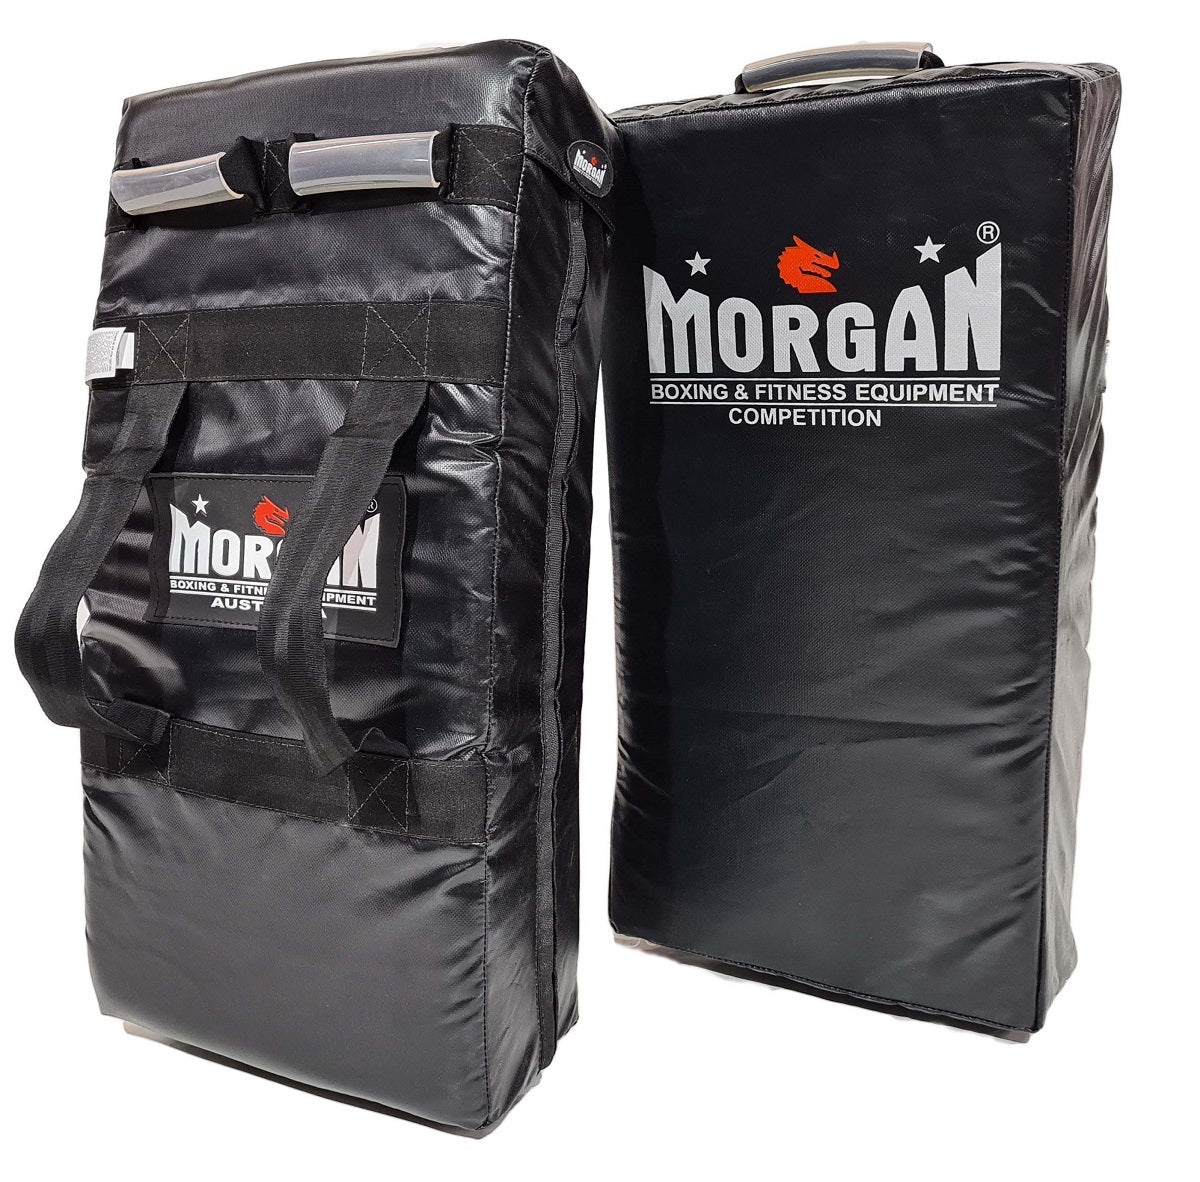 MORGAN COMPETITION EXTRA HEAVY DUTY MULTI HANDLE CURVED STRIKE & HIT SHIELD - Fitness Hero Brand new